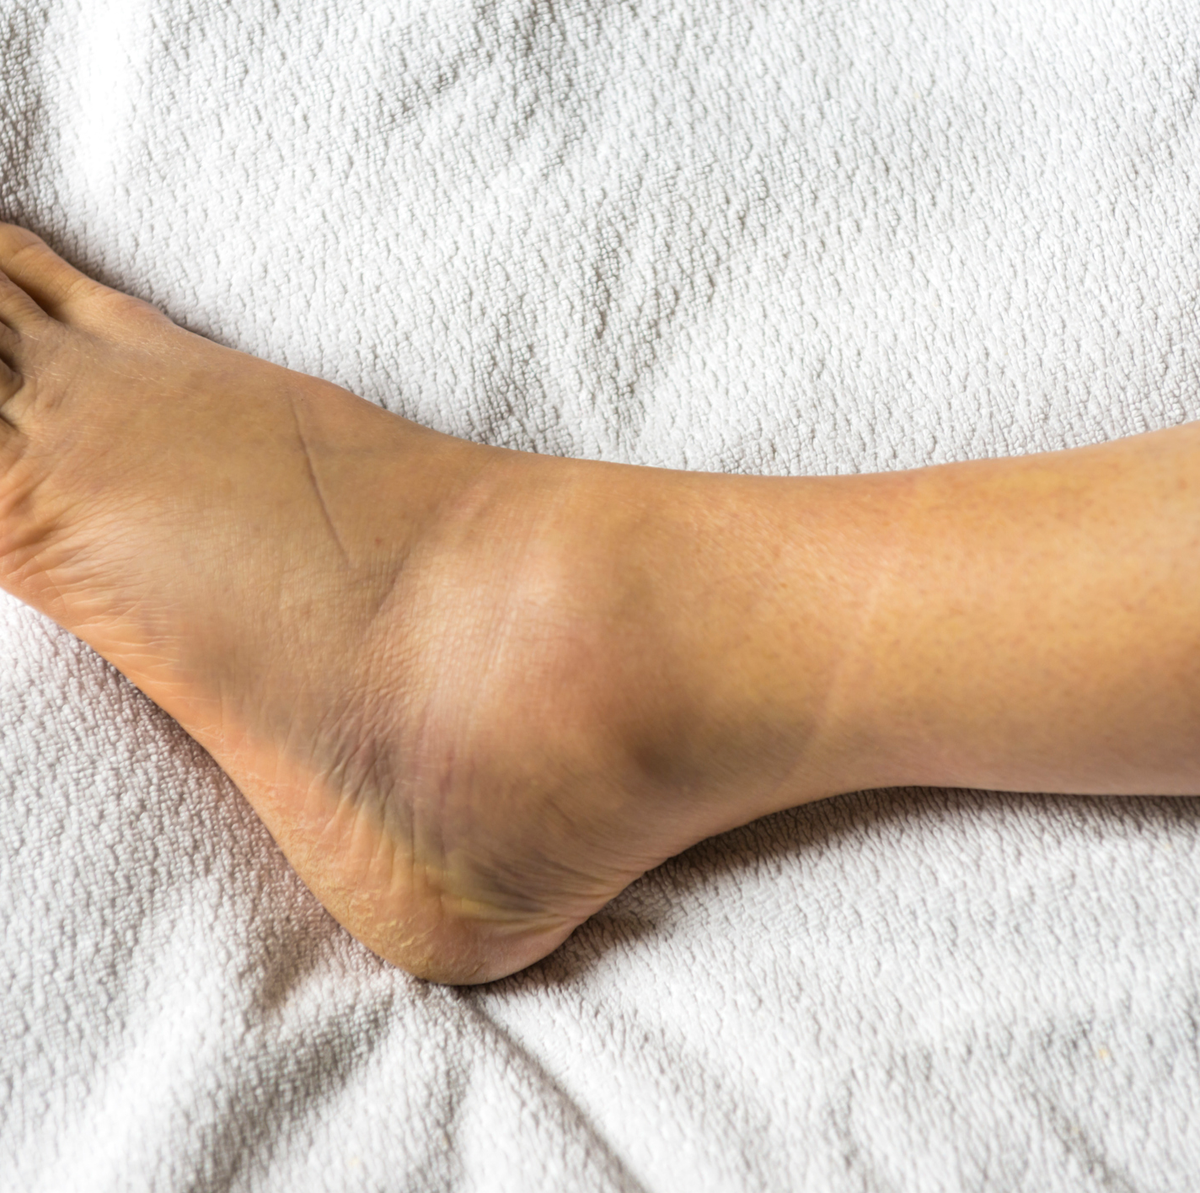 12 Causes of Swollen Ankles, Feet - Why Are My Ankles Swollen